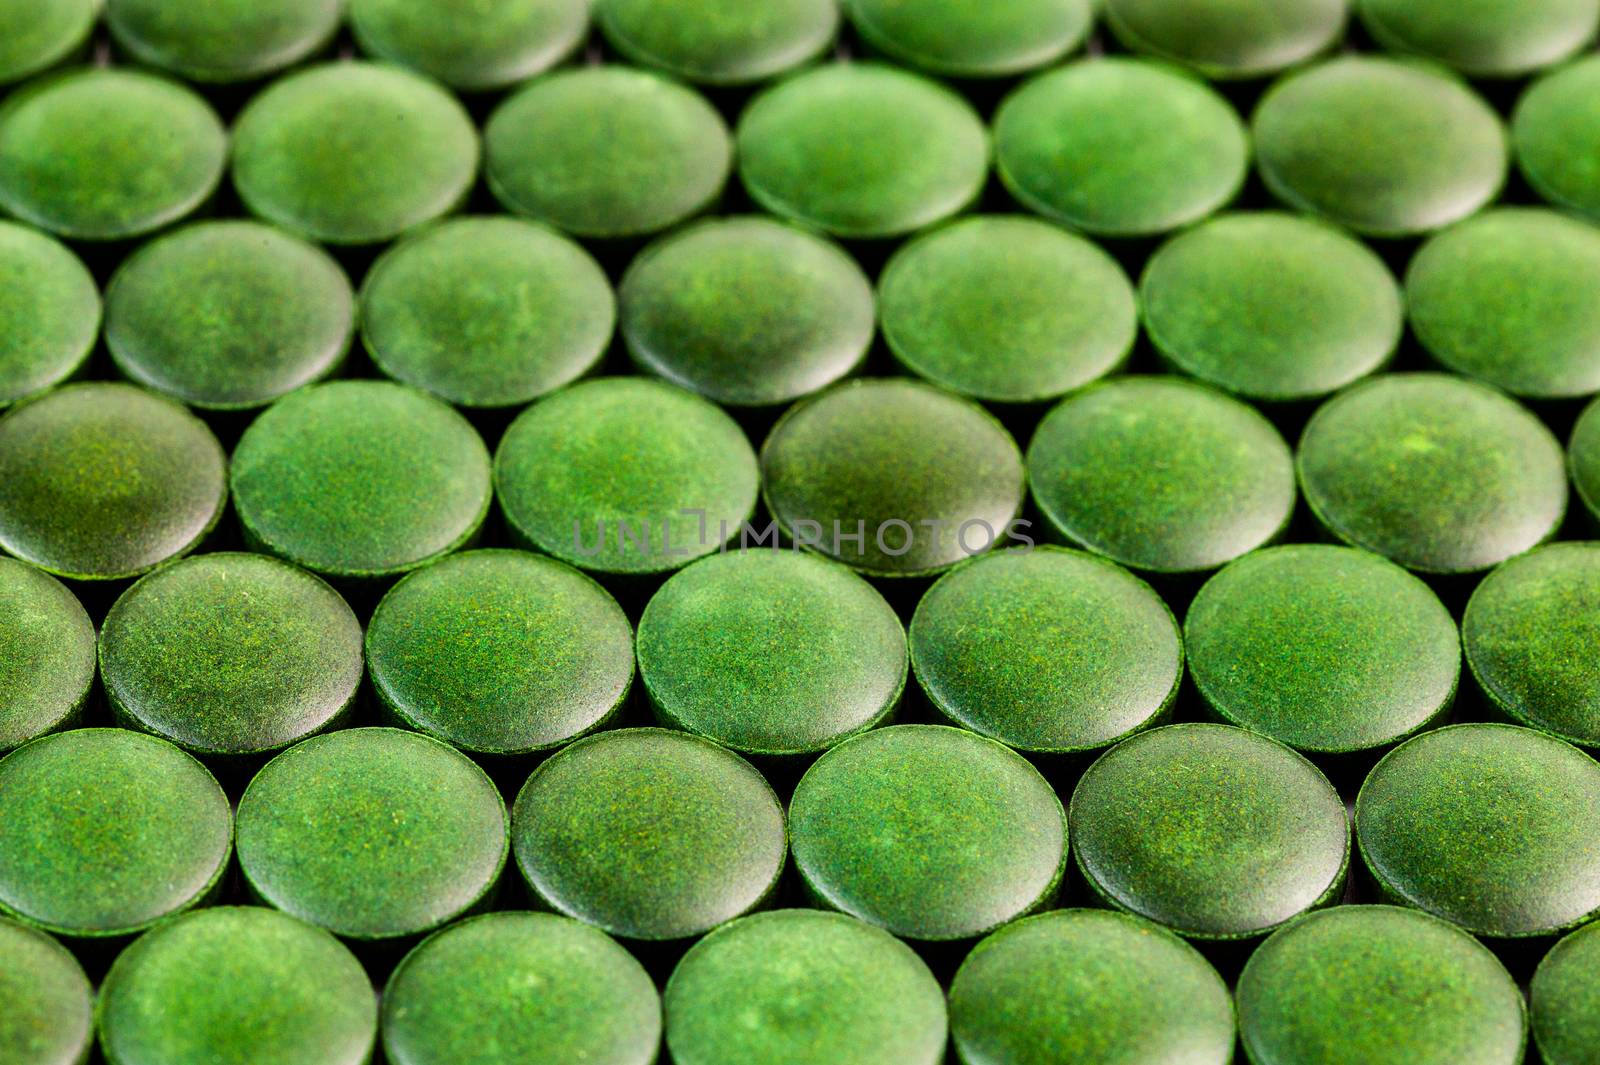 close-up background of many green organic spirulina tablets laid tight in one layer on flat surface.